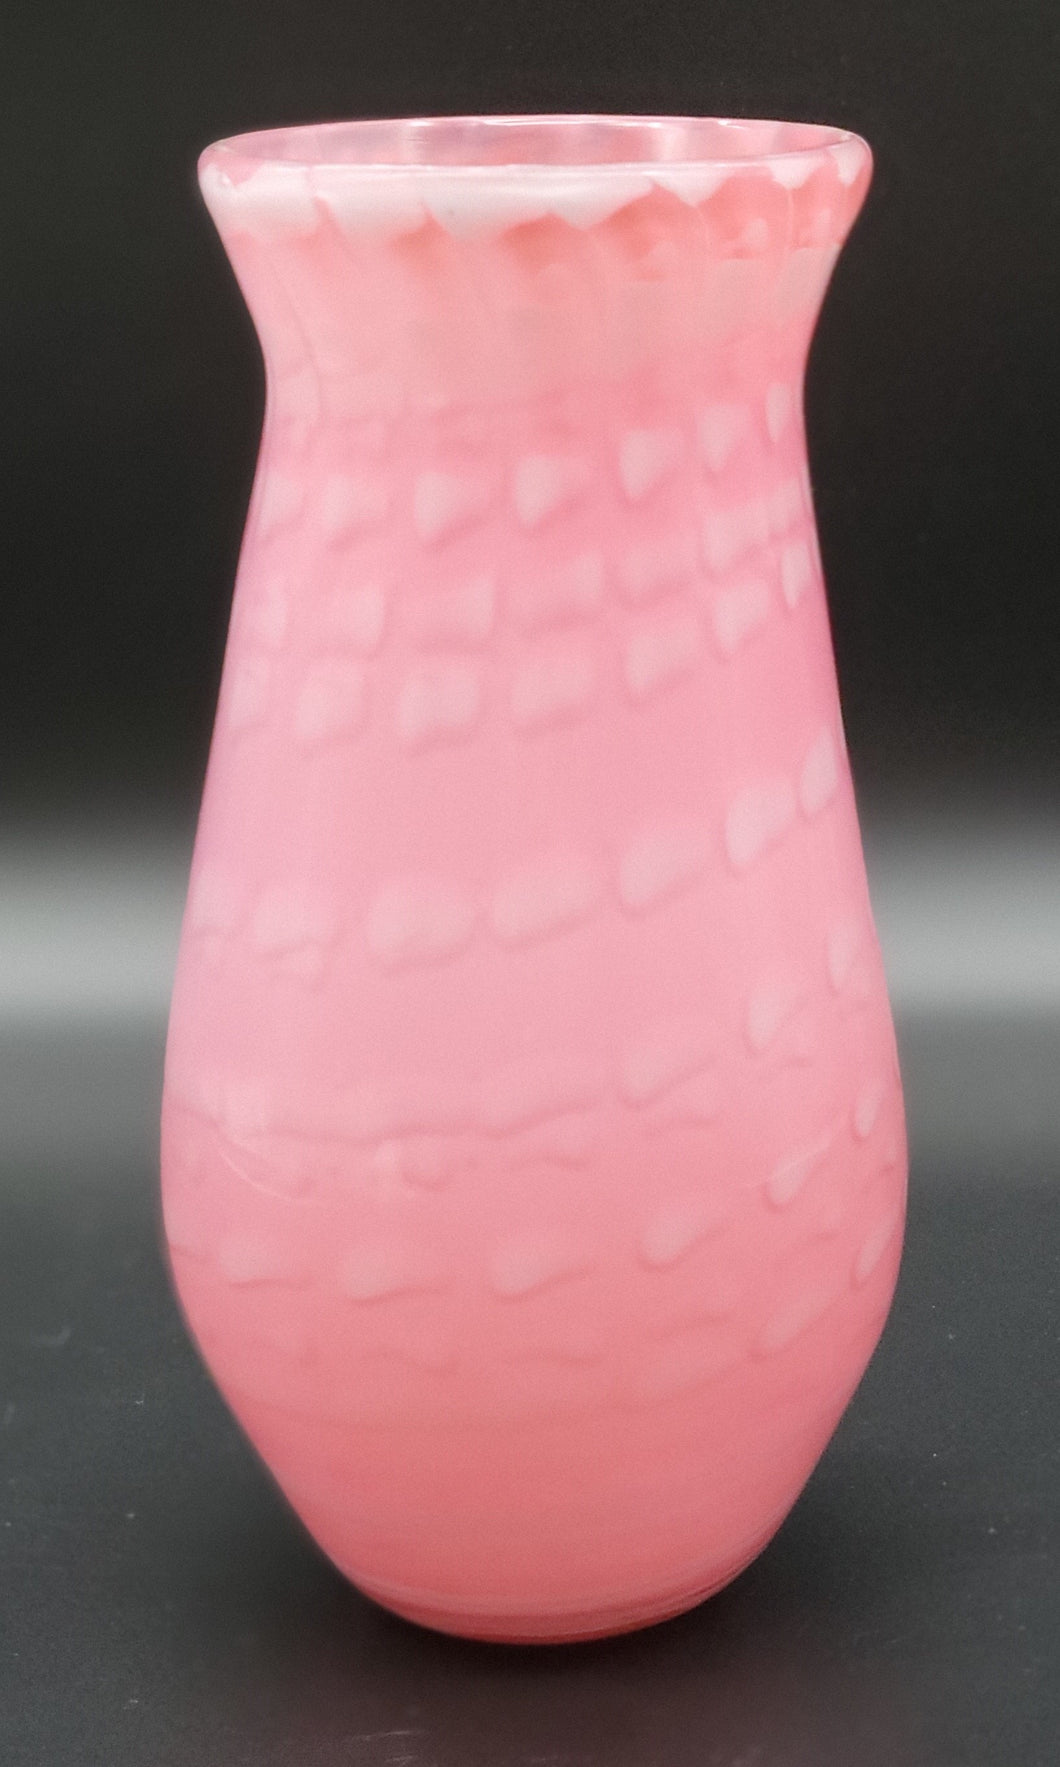 Pink Vase with a Dashed Wrap